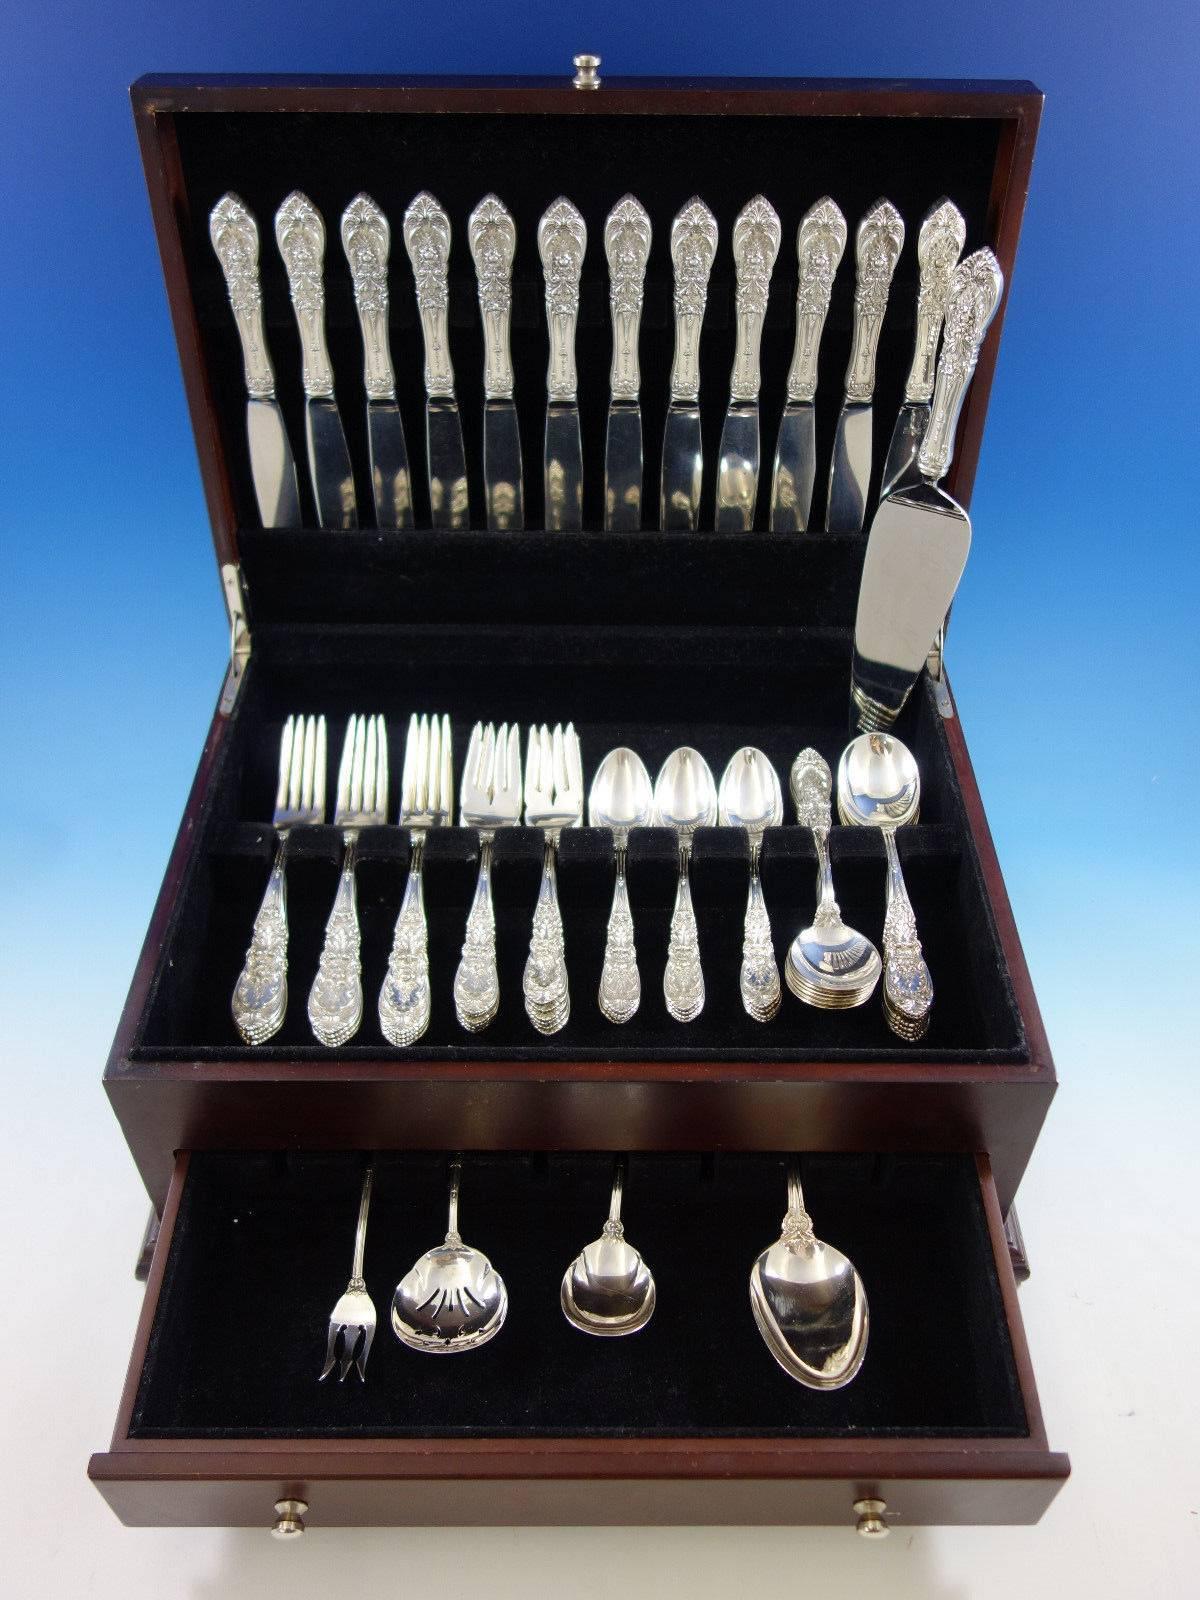 Richelieu by International sterling silver flatware set 65 pieces. This set includes: 

12 knives, 8 7/8